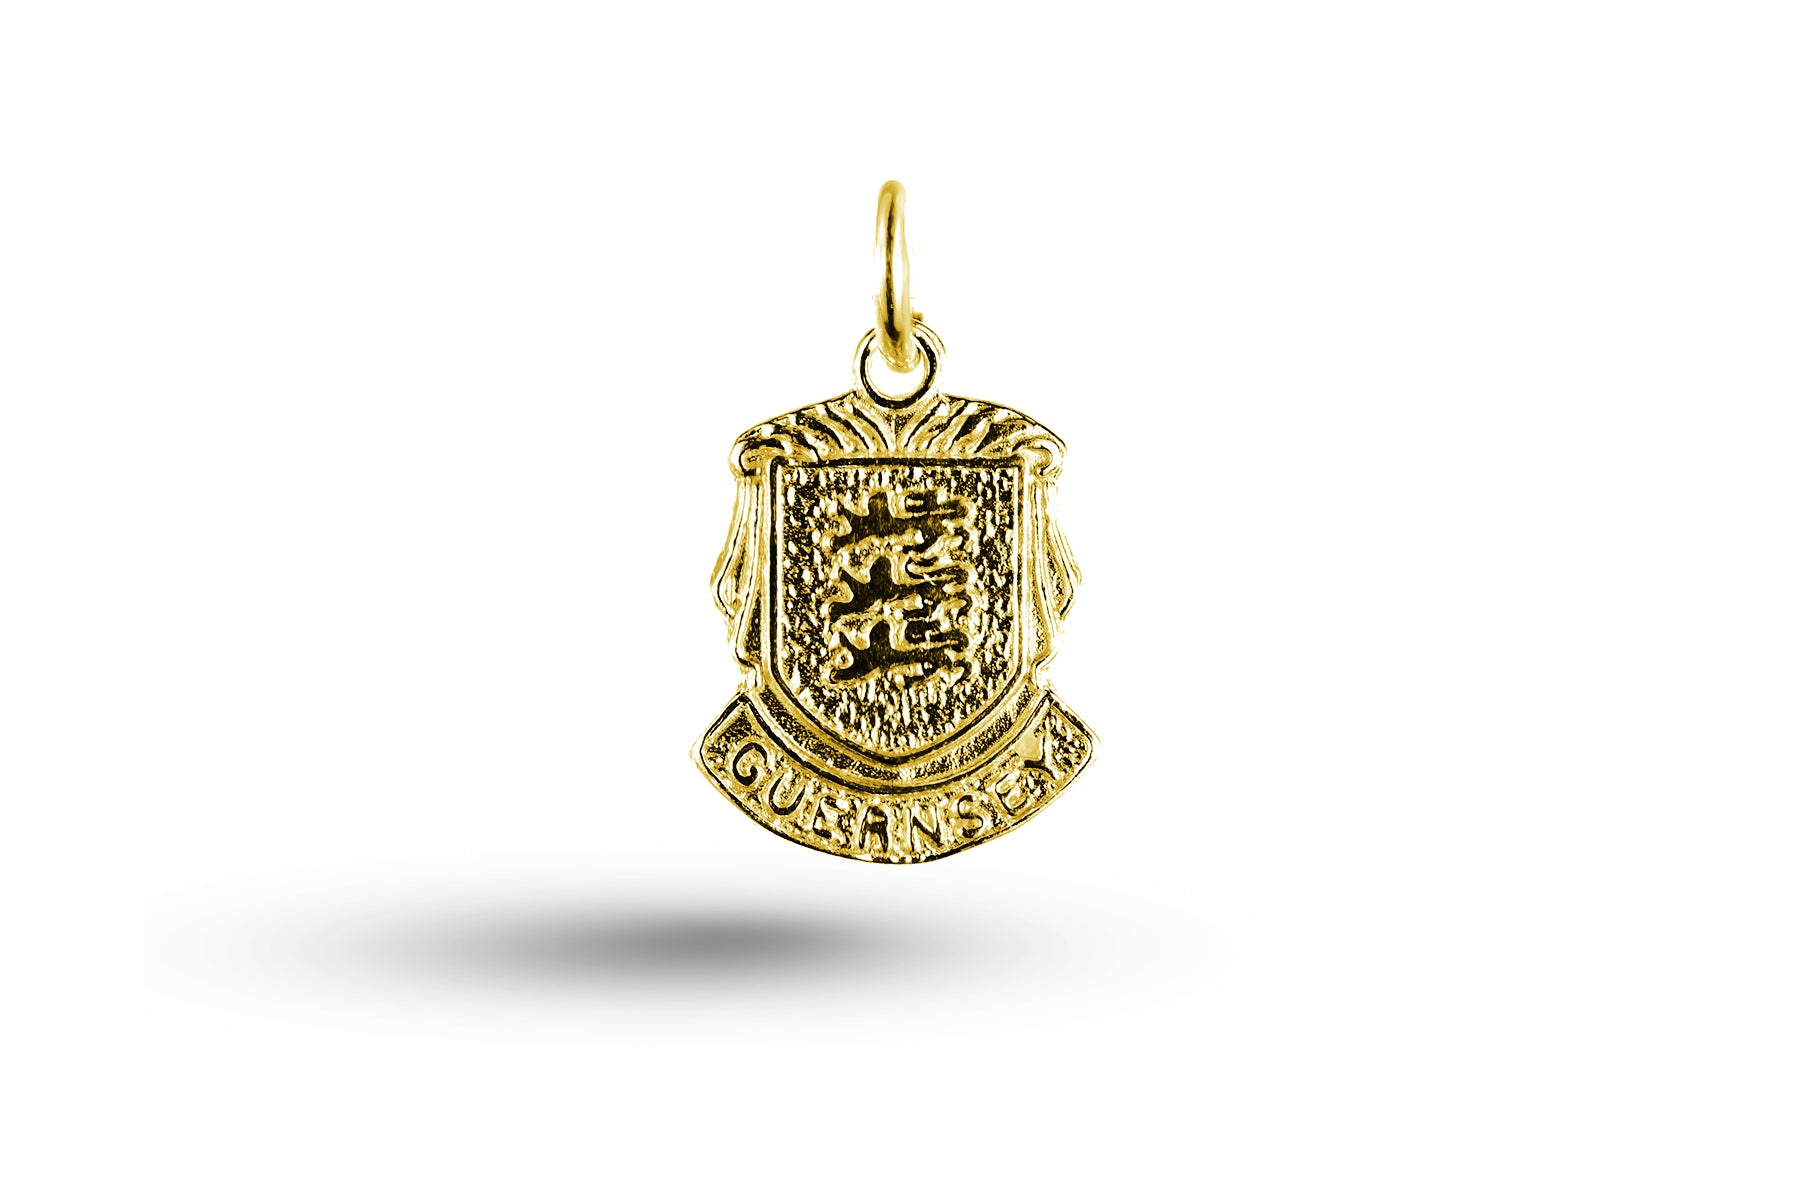 Yellow gold Guernsey Crest charm.